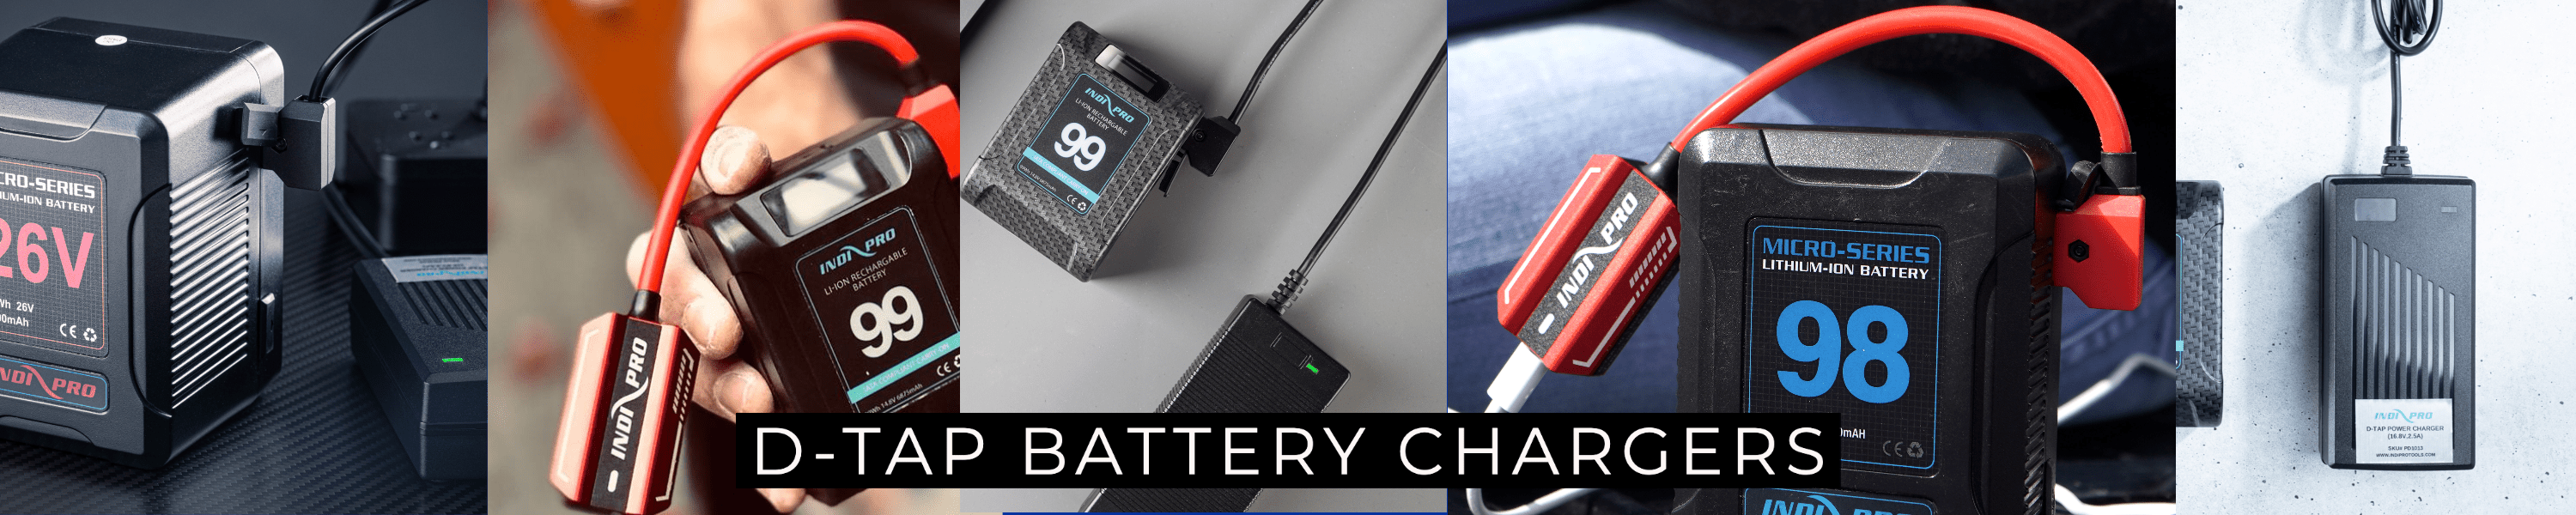 D-Tap Chargers